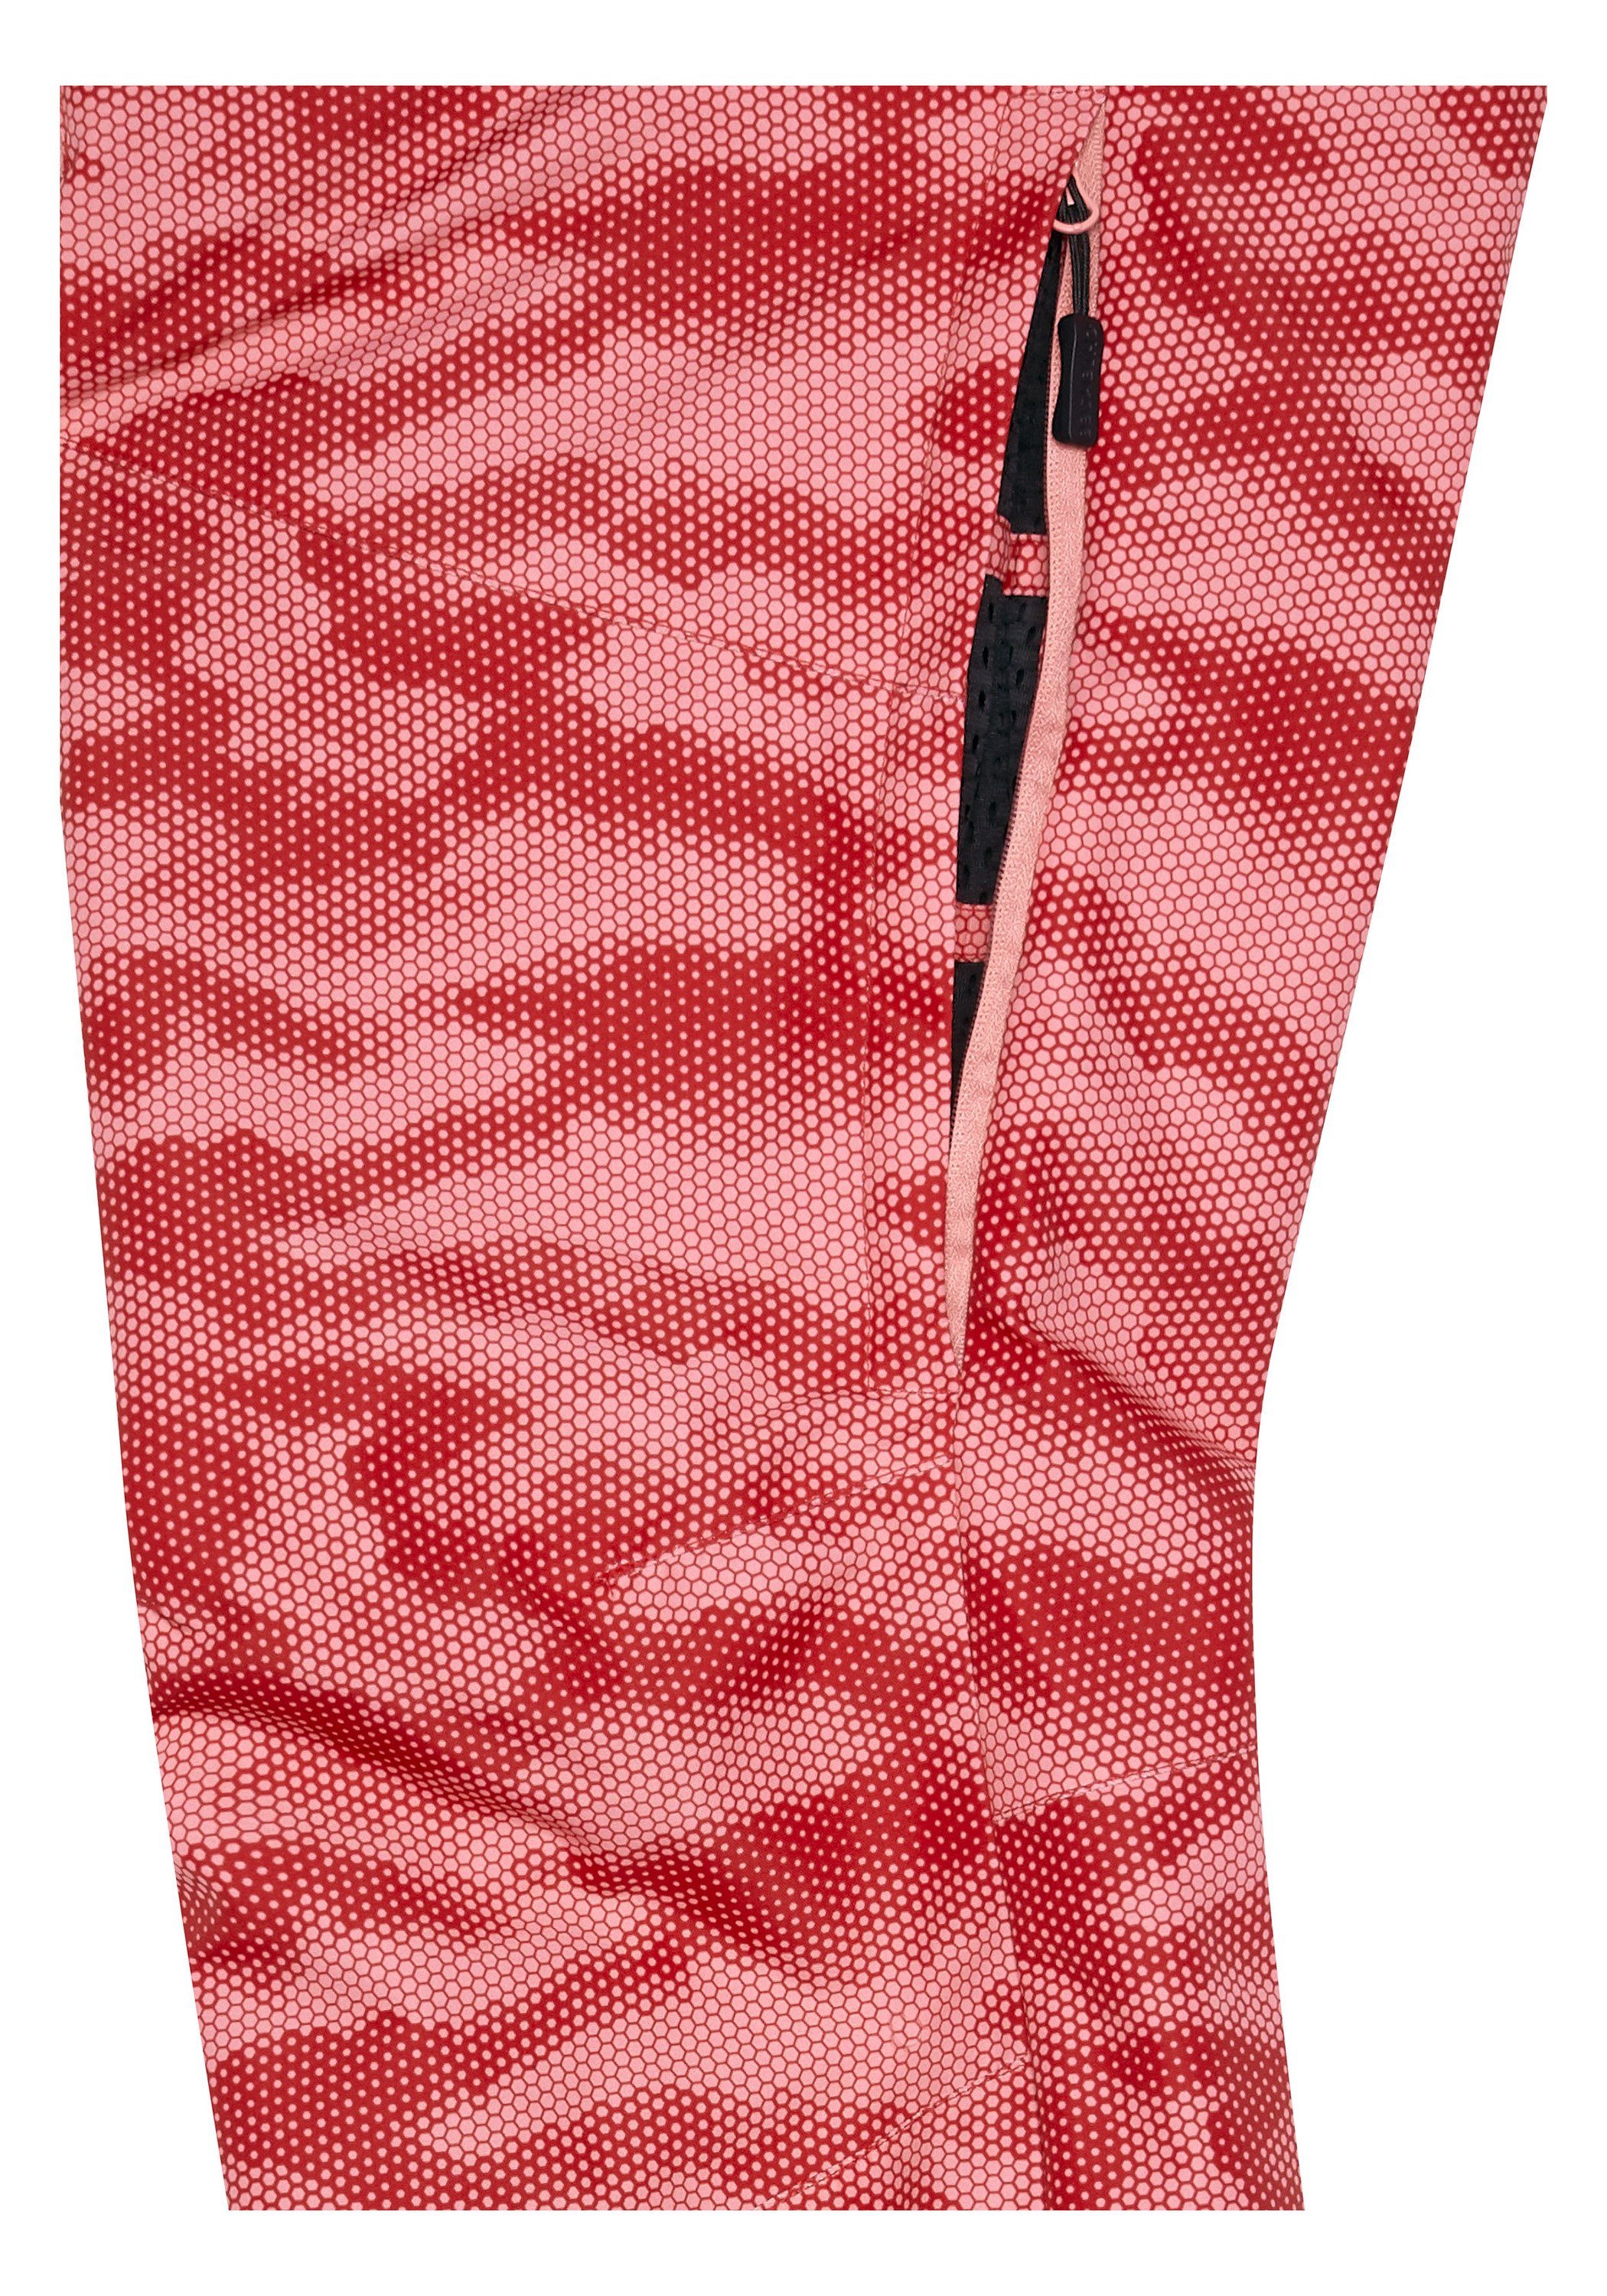 Sporthose 1 Allover-Muster Chiemsee mit hell Slim-Fit Skihose rosa/rosa